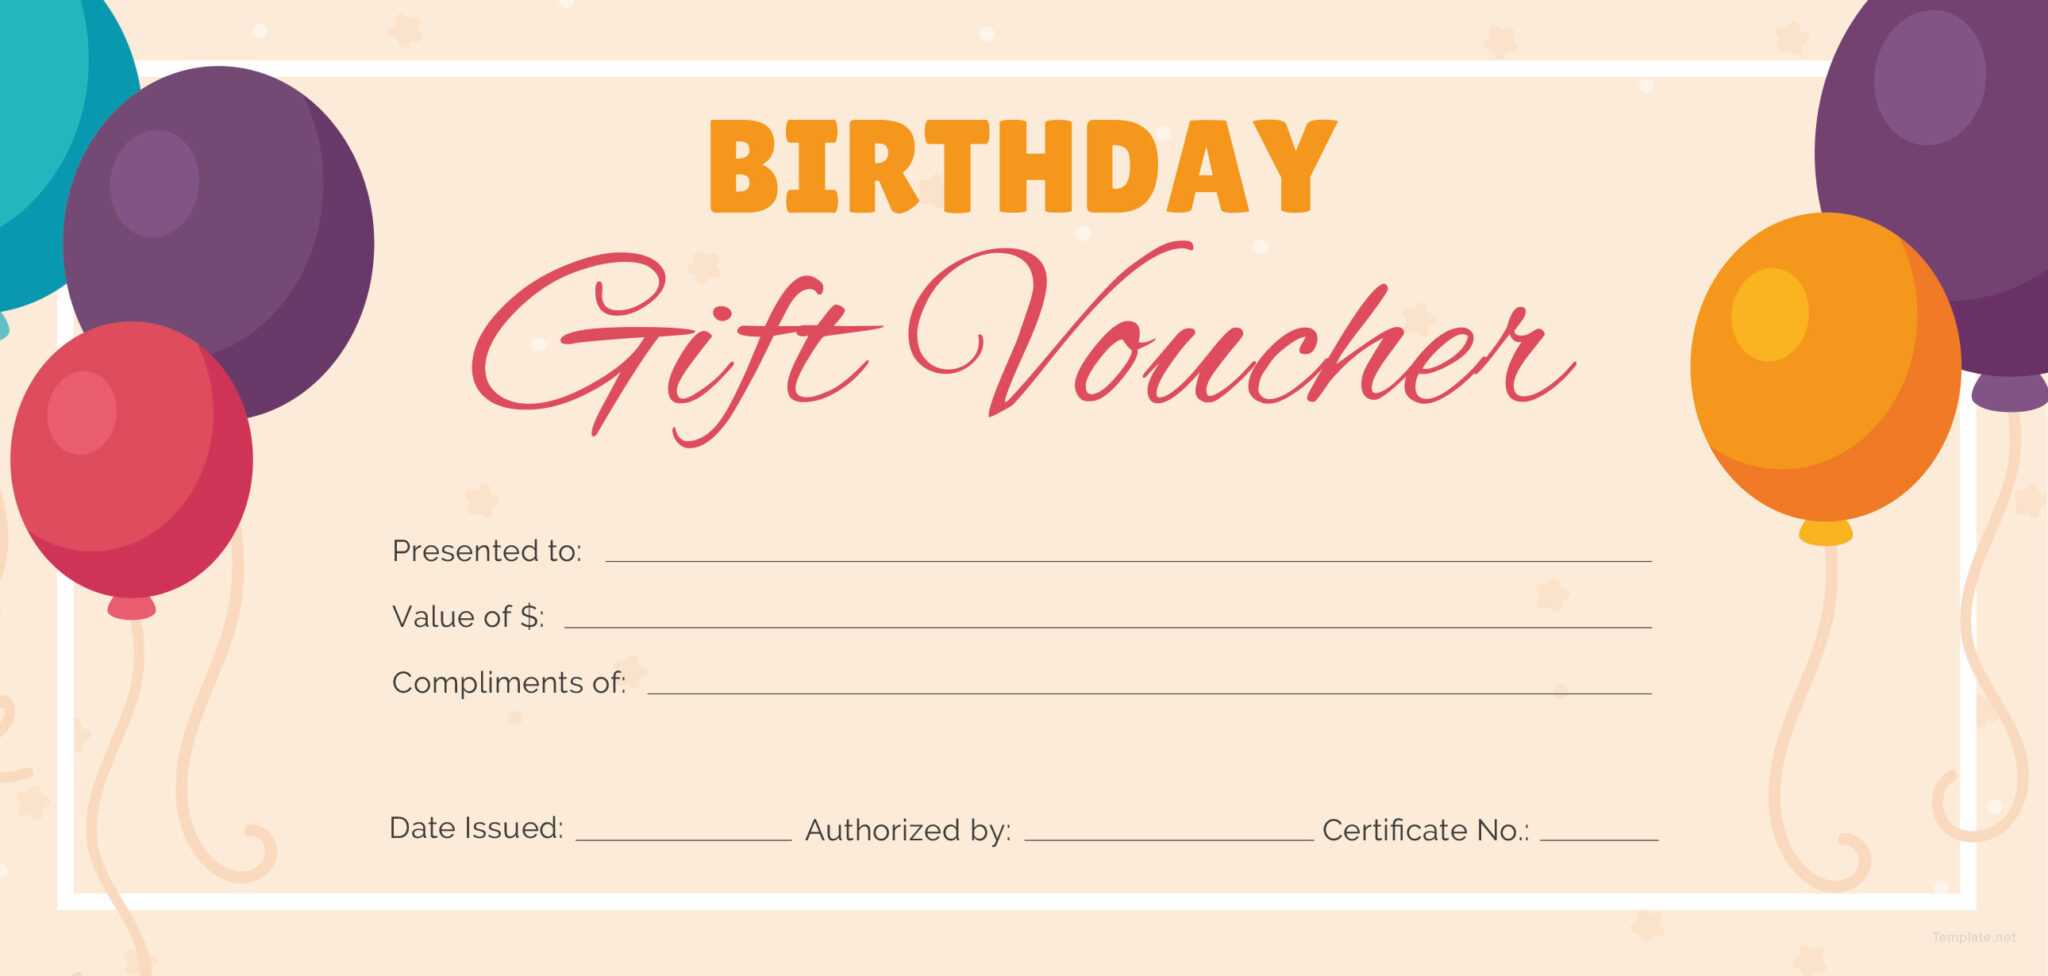 Birthday Gift Certificate Template Free Printable Throughout Printable Gift Certificates